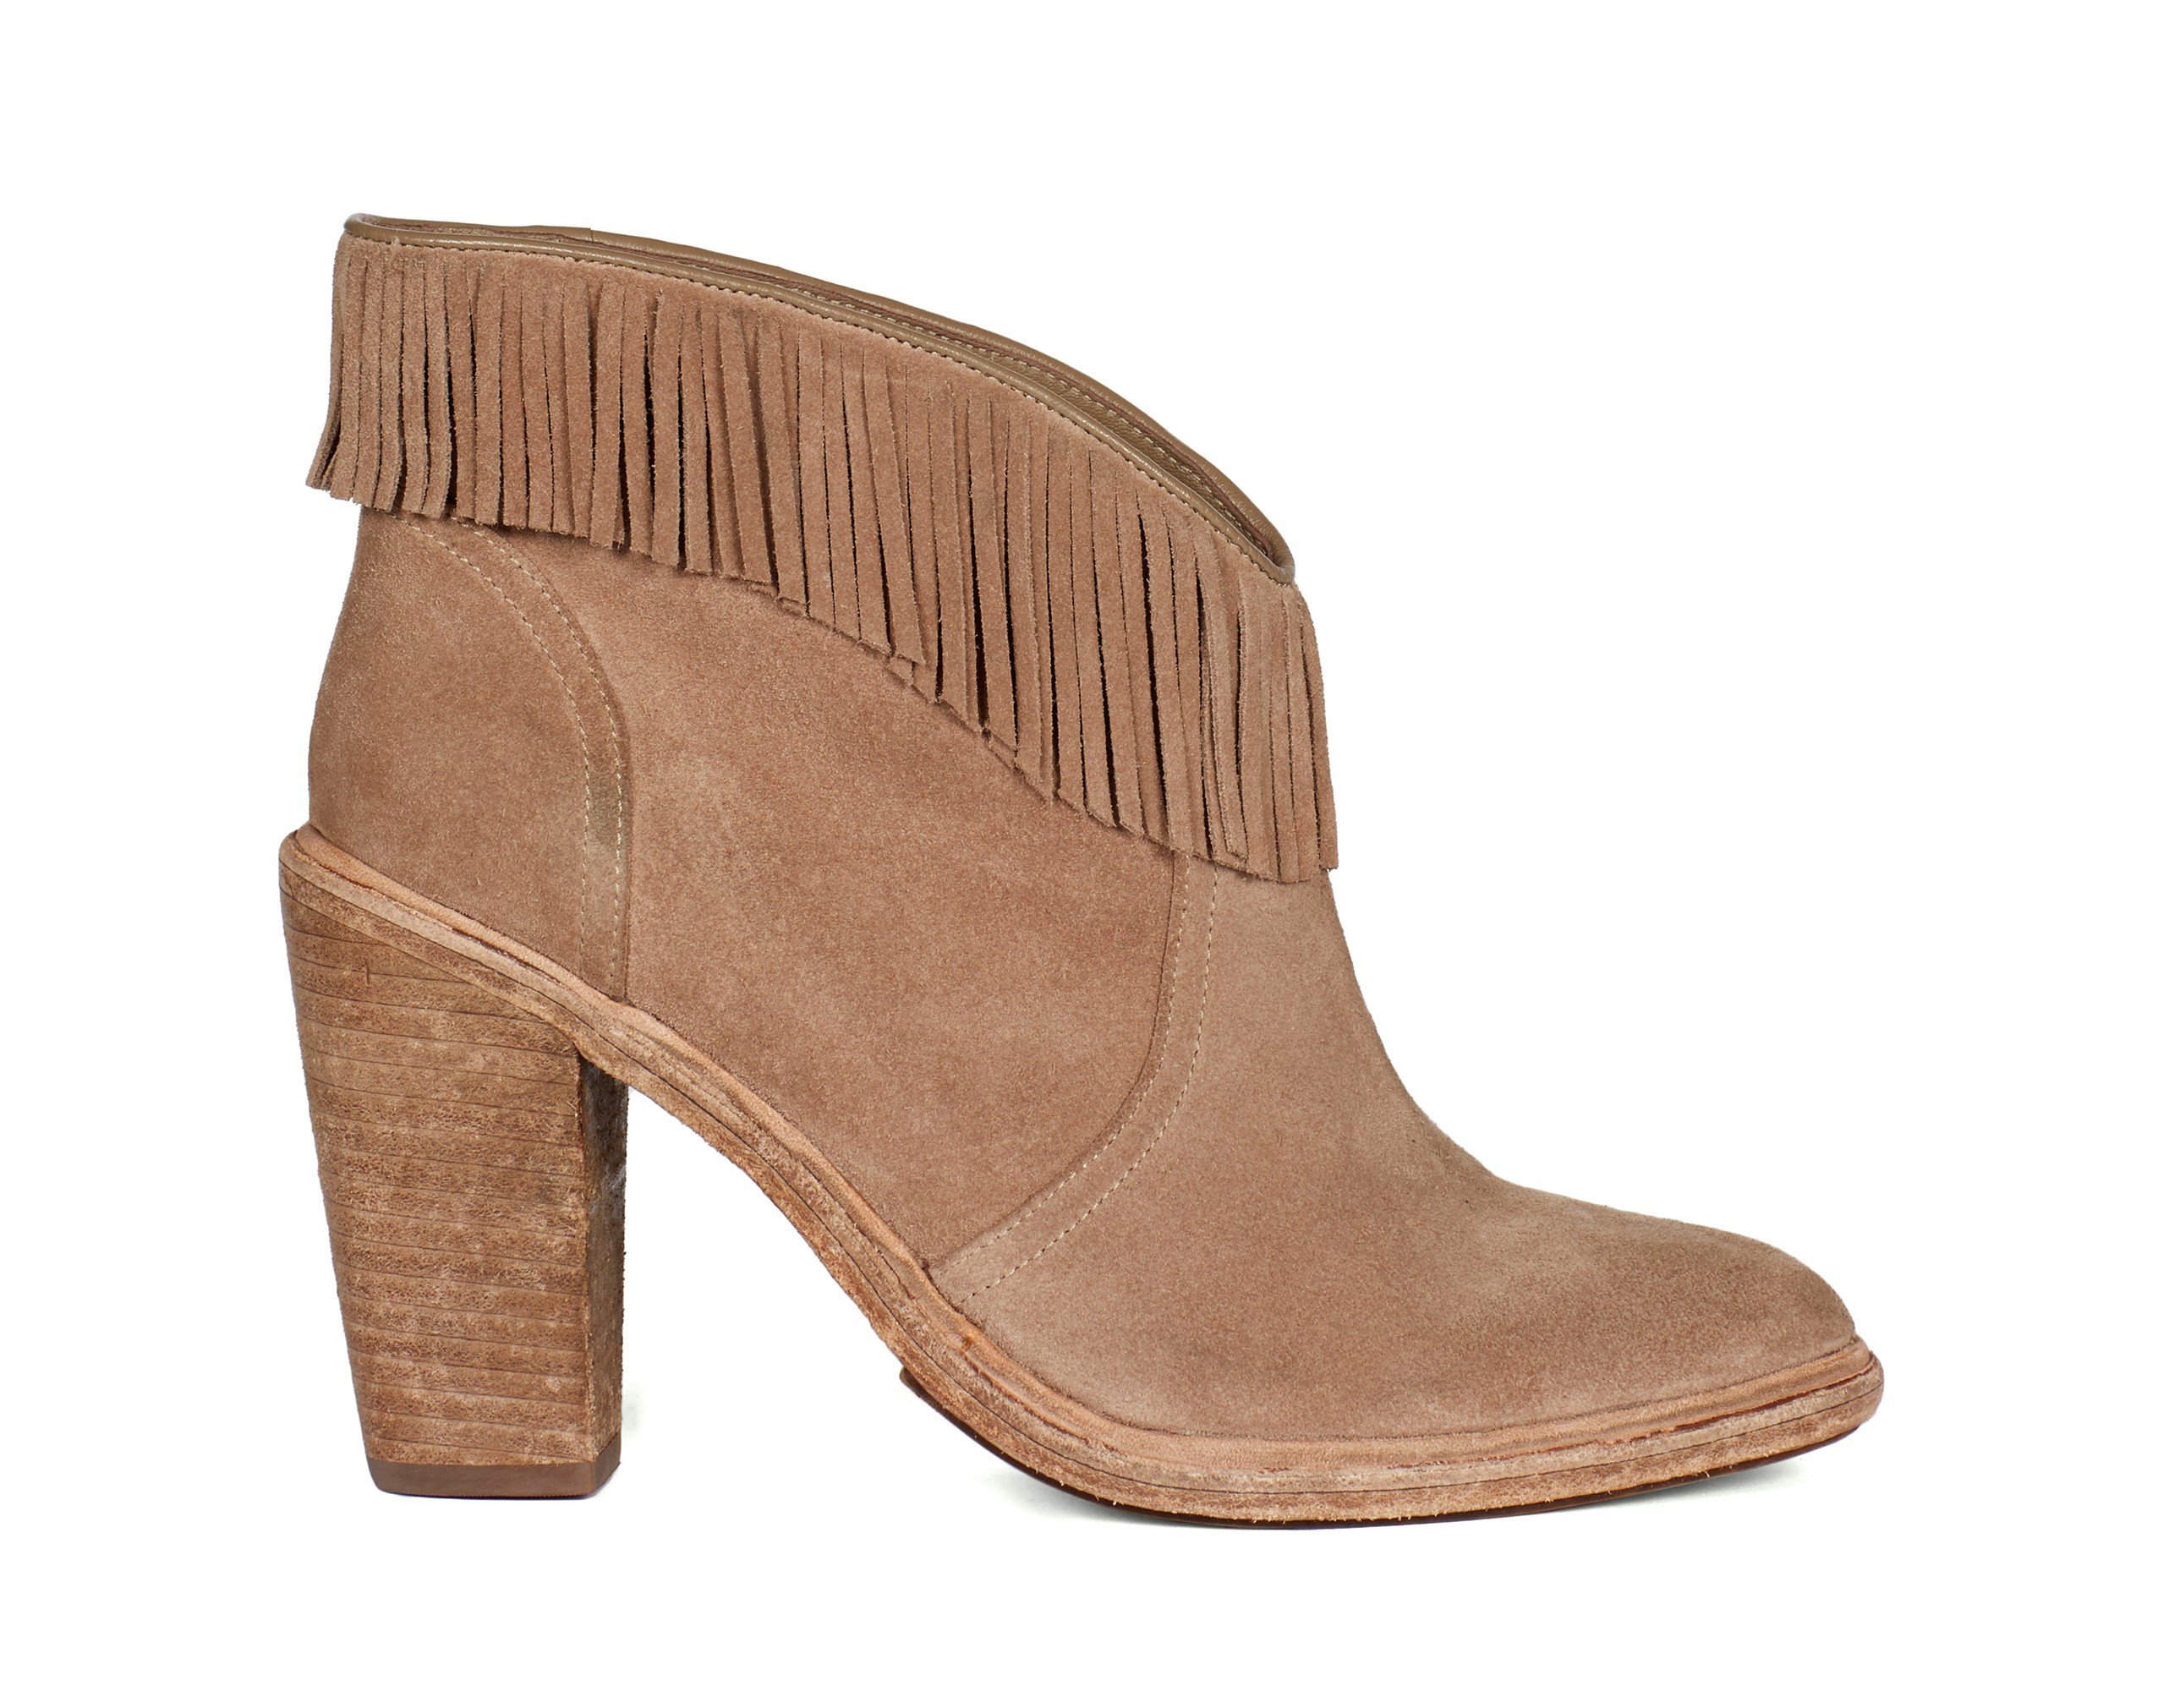 Joie Loren Fringed Suede Ankle Boots in Brown - Lyst